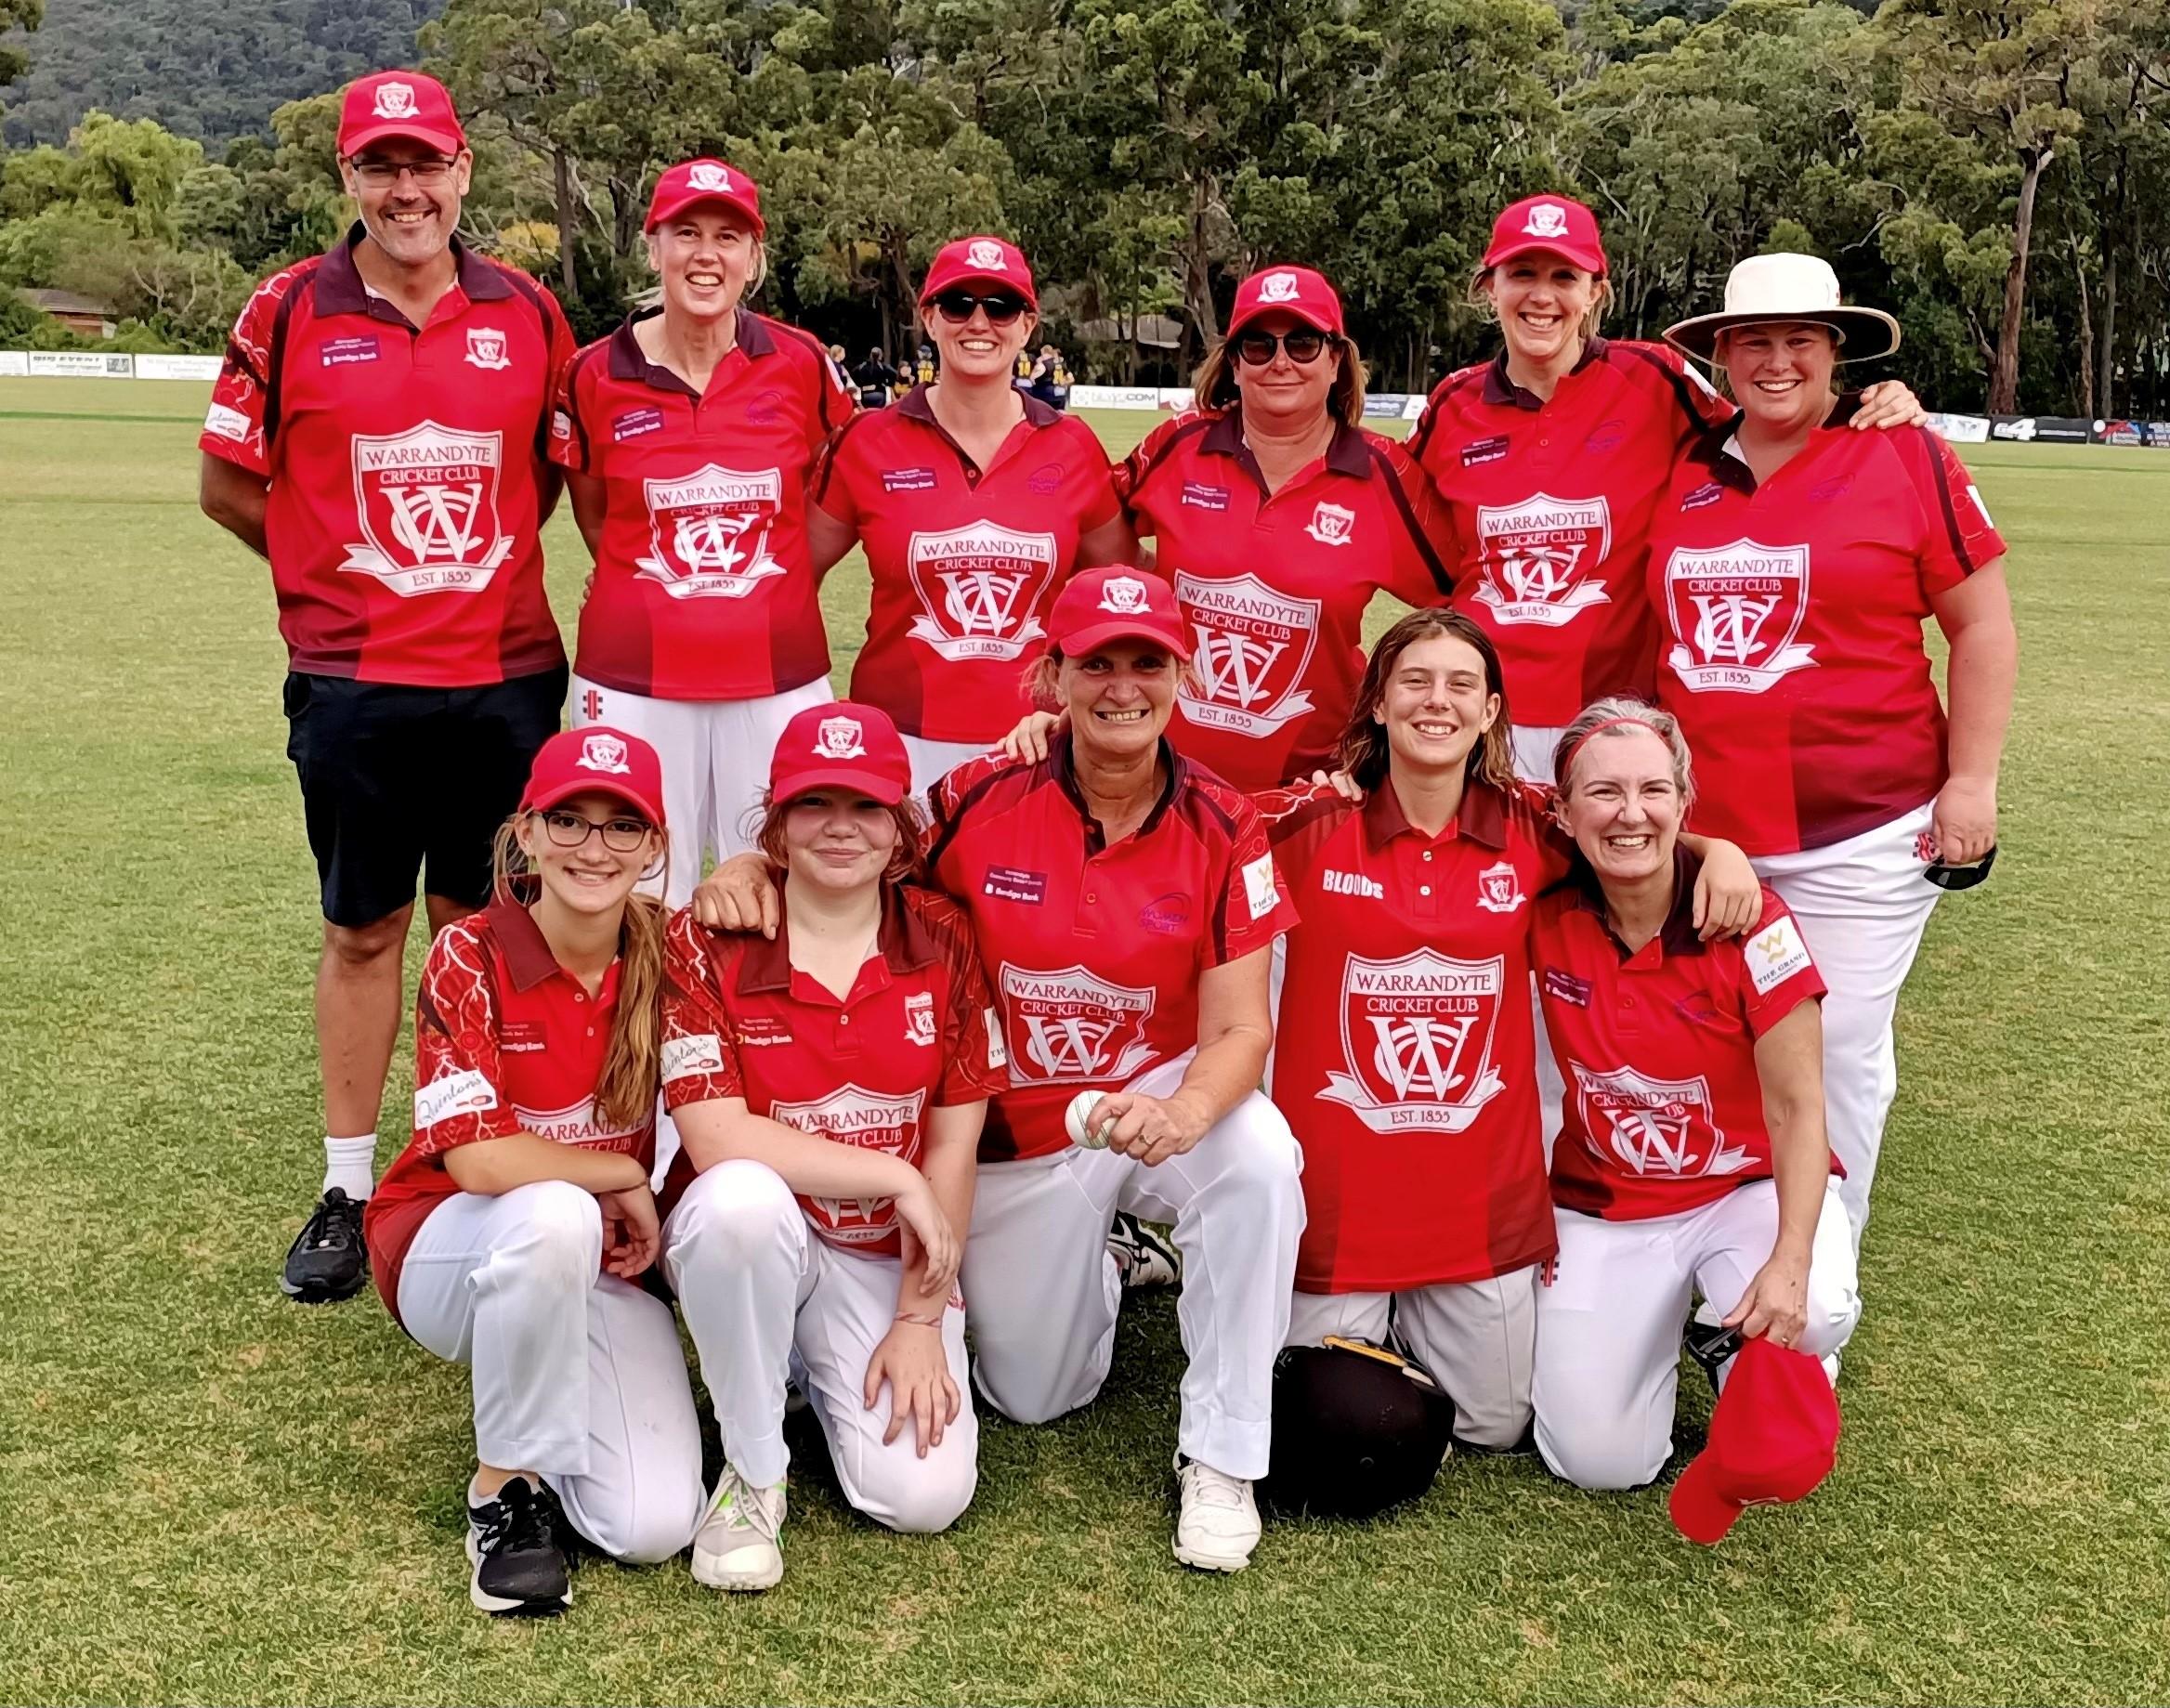 Group photo of Warrandyte womens cricket team all wearing red uniforms